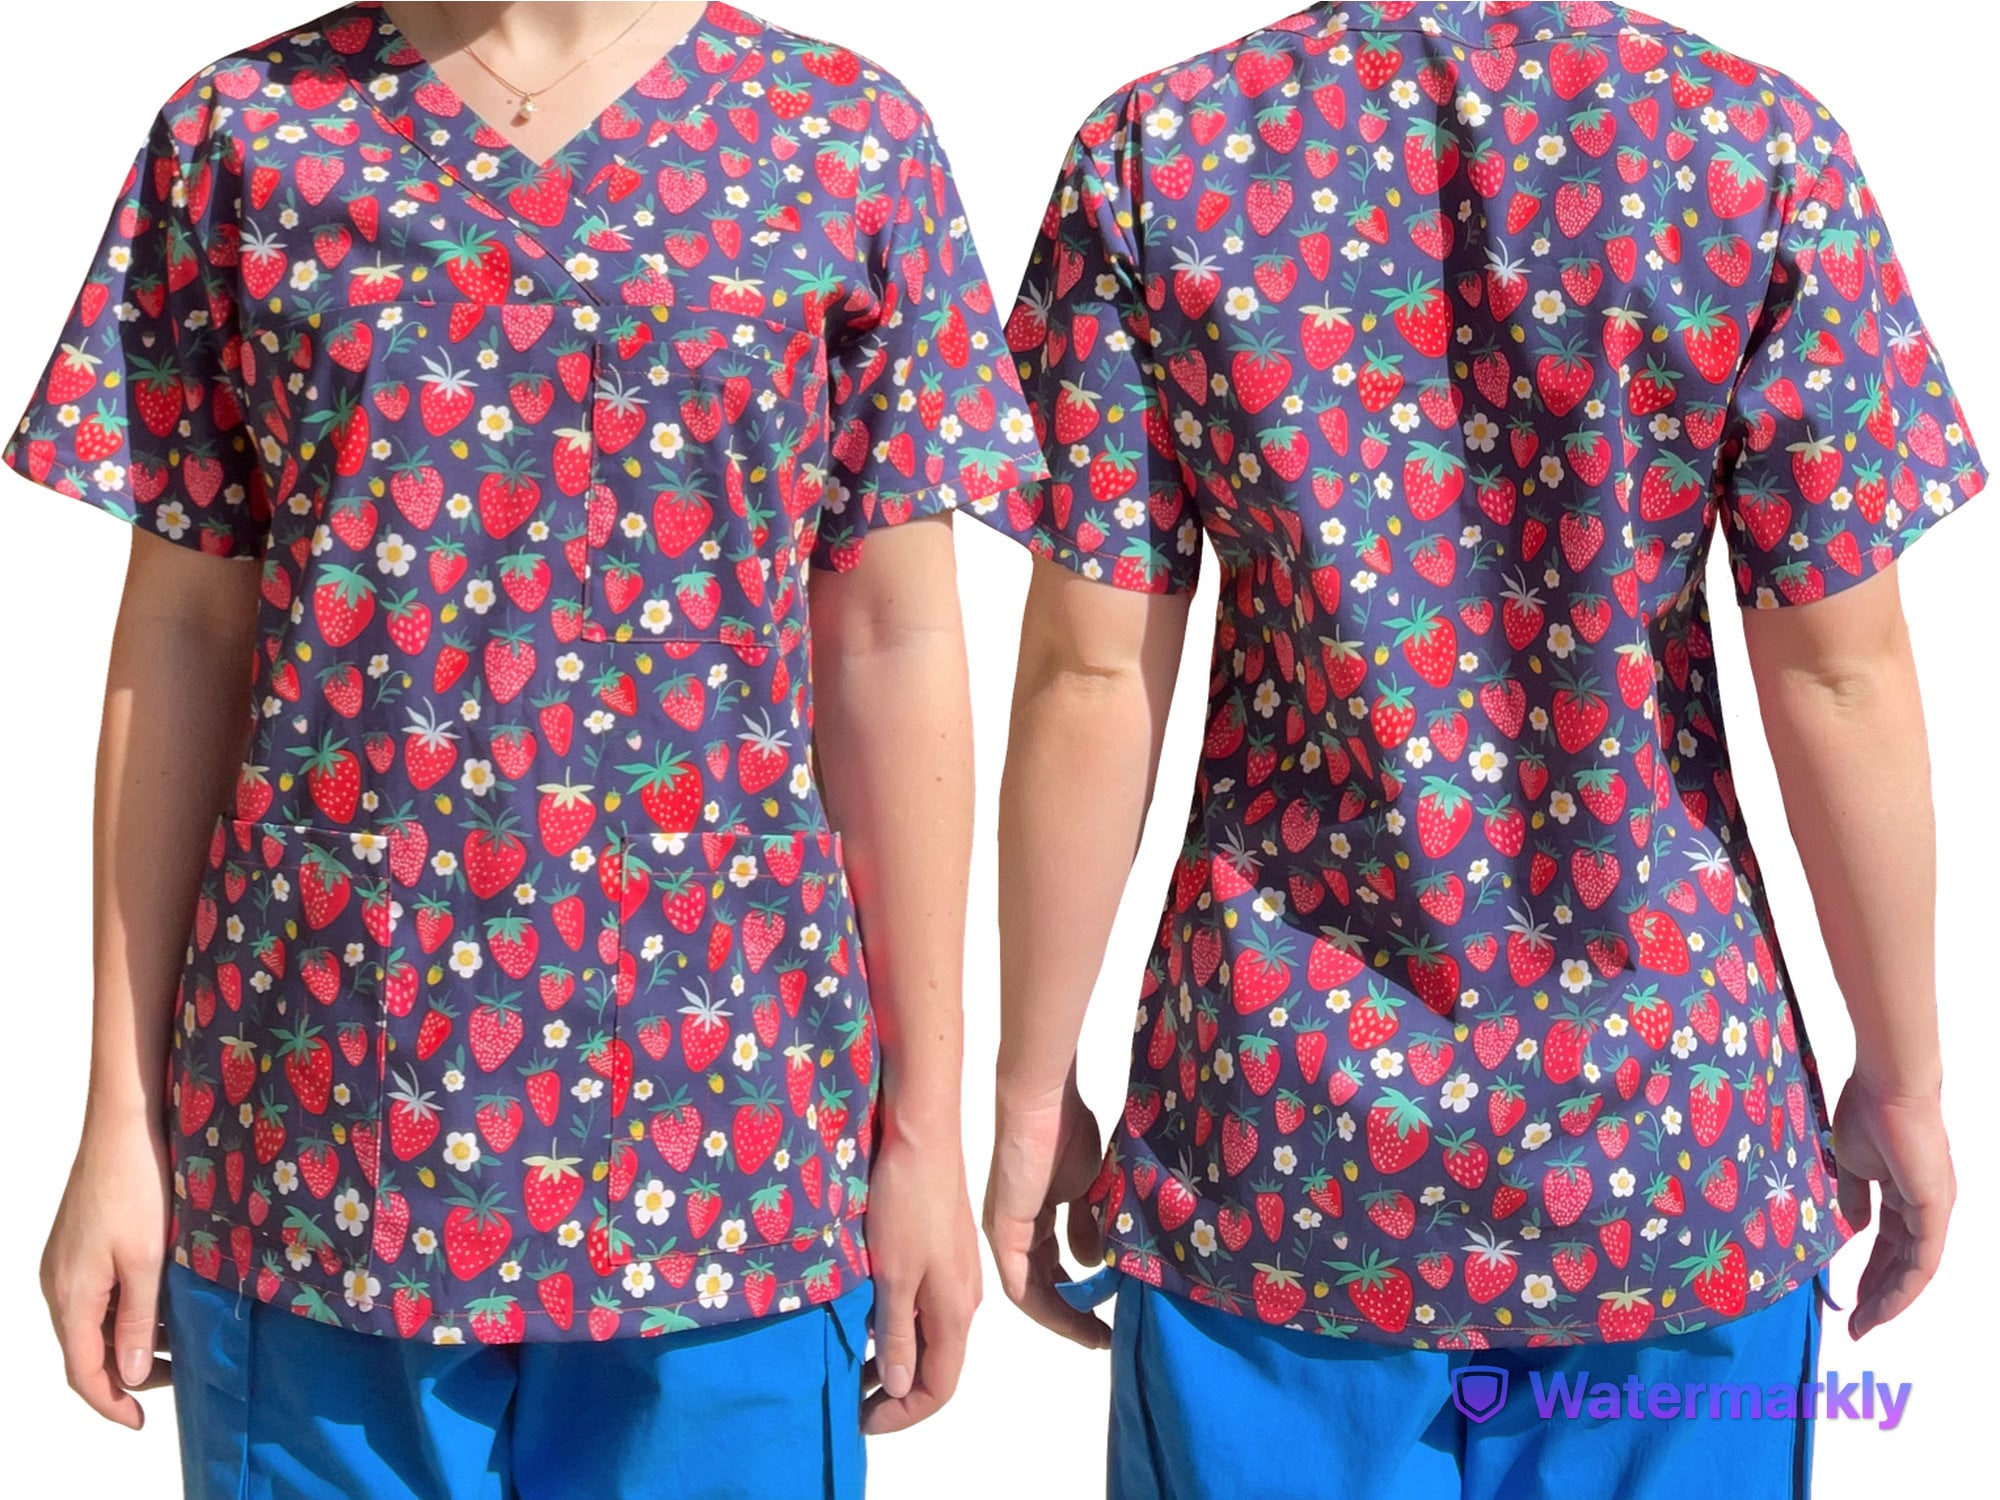 strawberry SCRUB TOPS For all health care workers, nurses